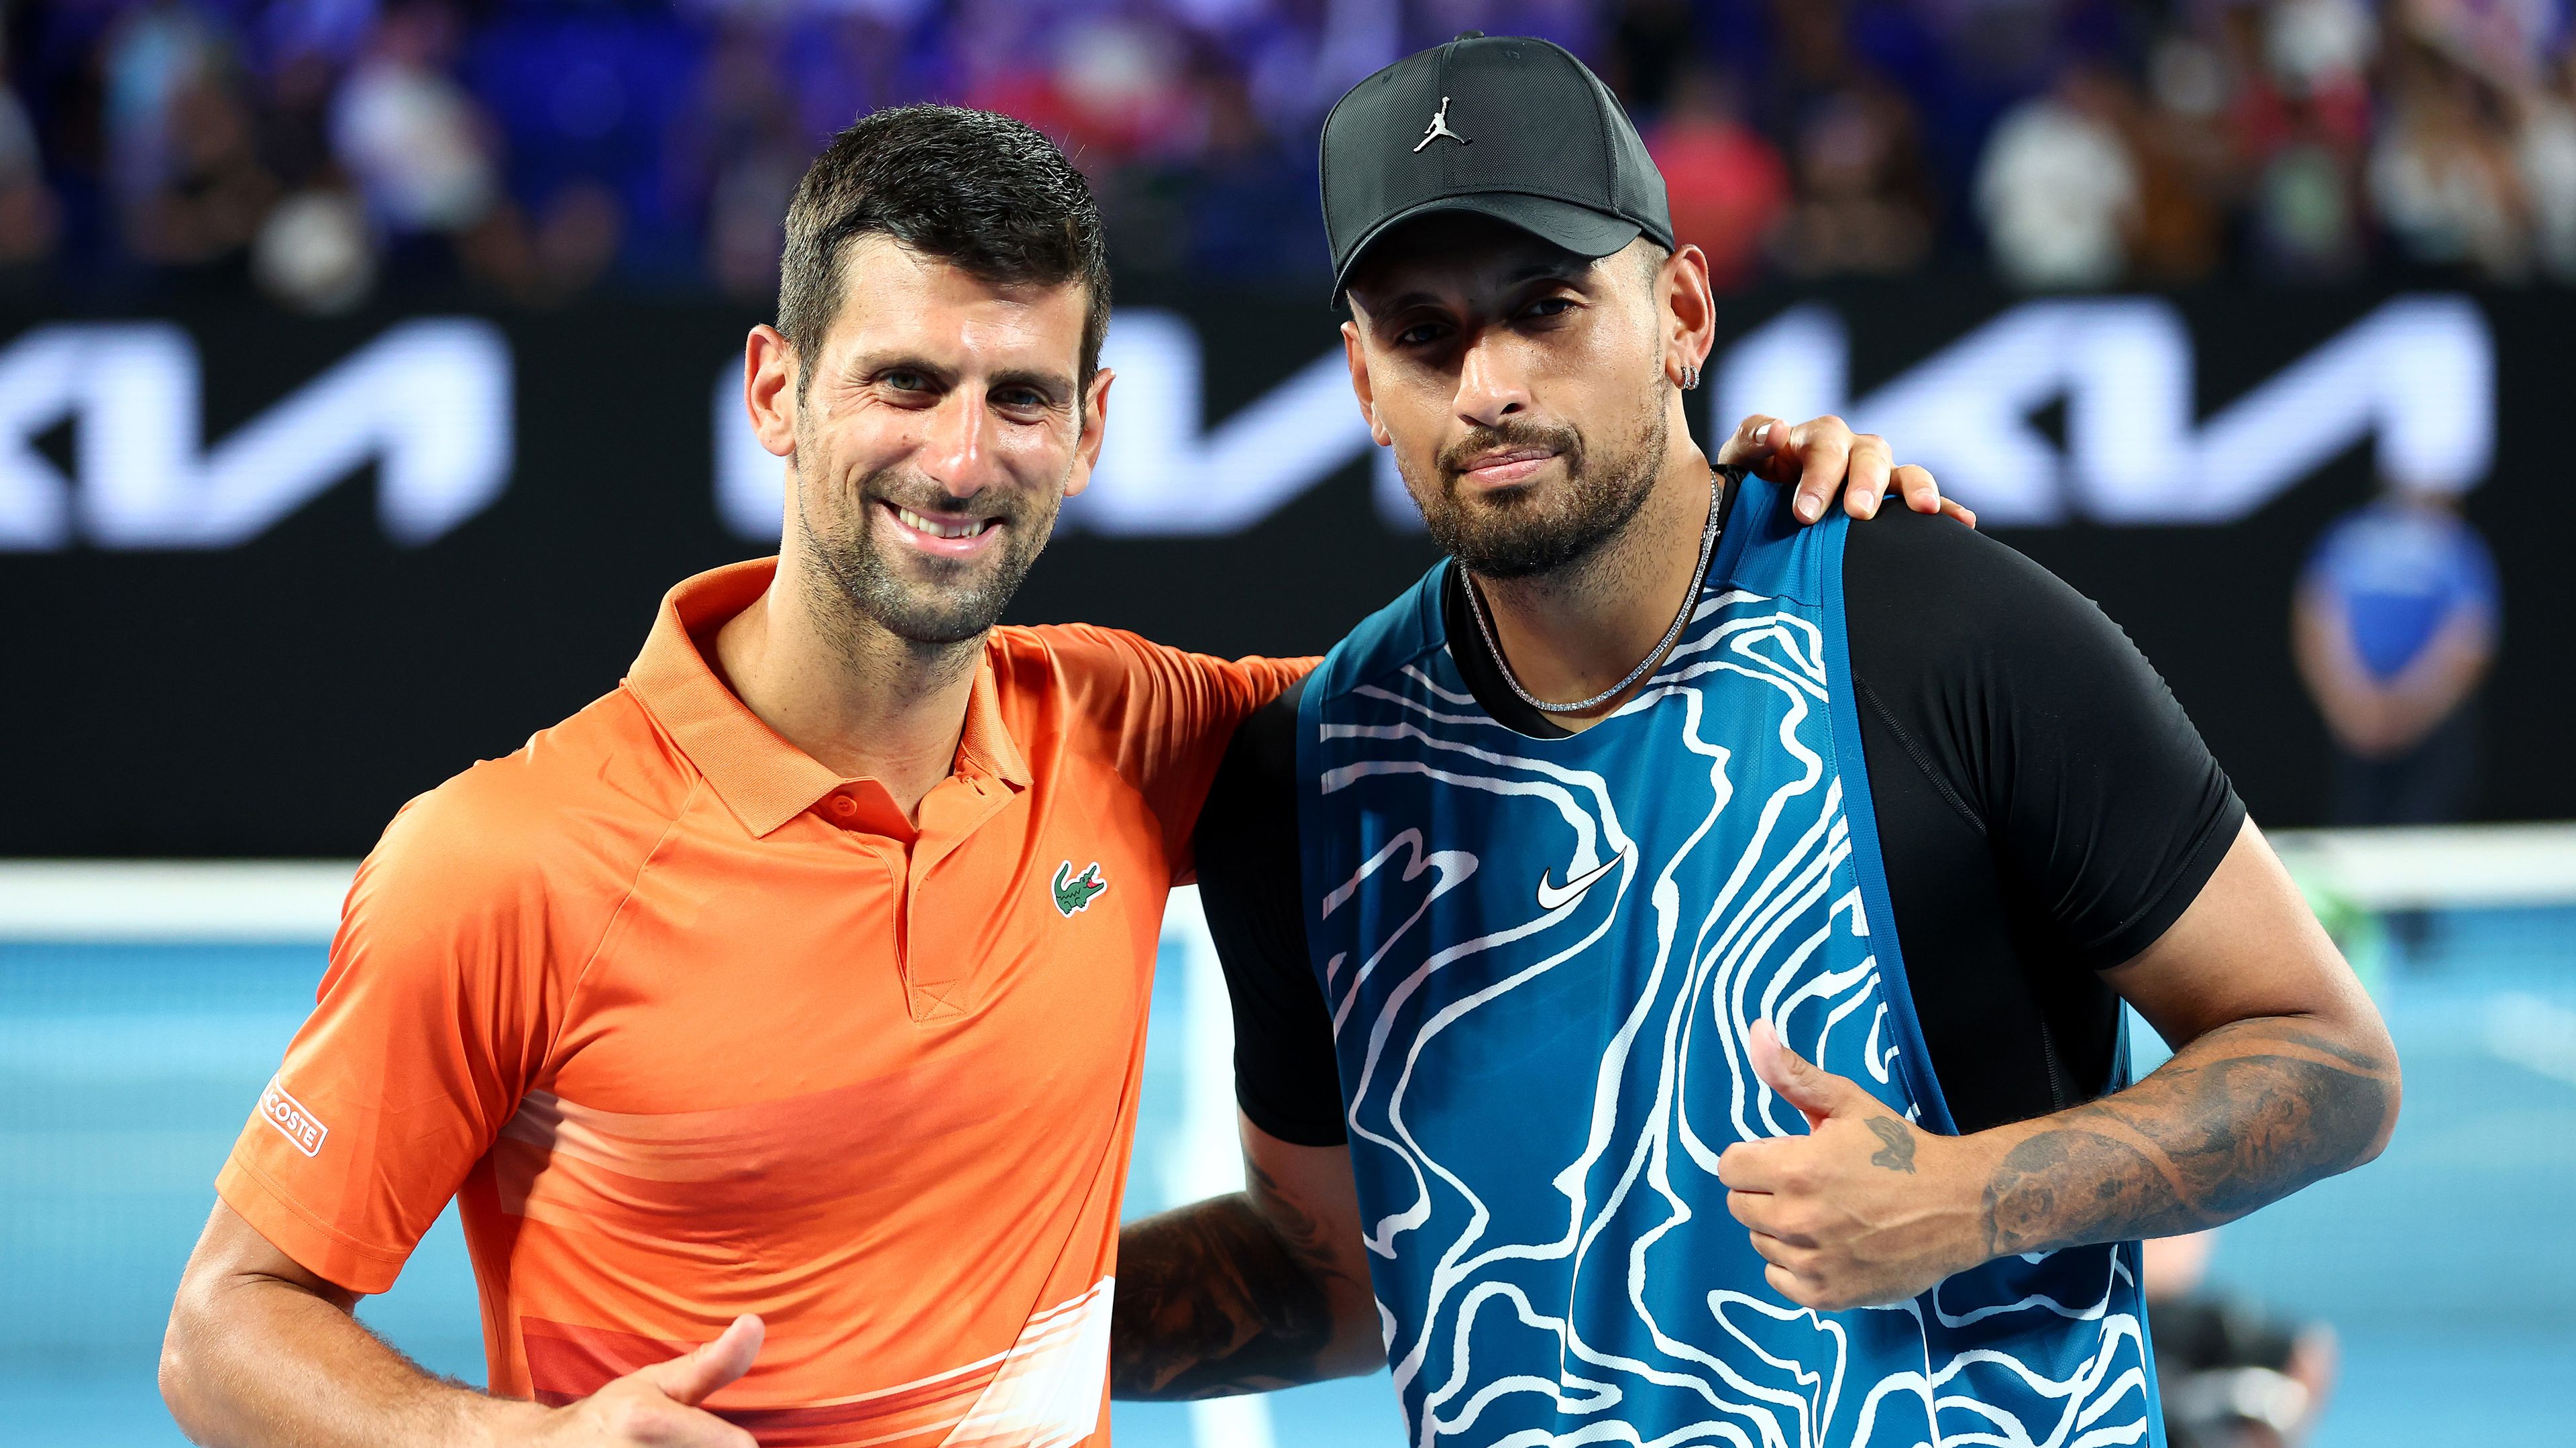 EXCLUSIVE: Can anyone beat Novak Djokovic? Wally Masur believes an Aussie star has exactly what it takes – Wide World of Sports